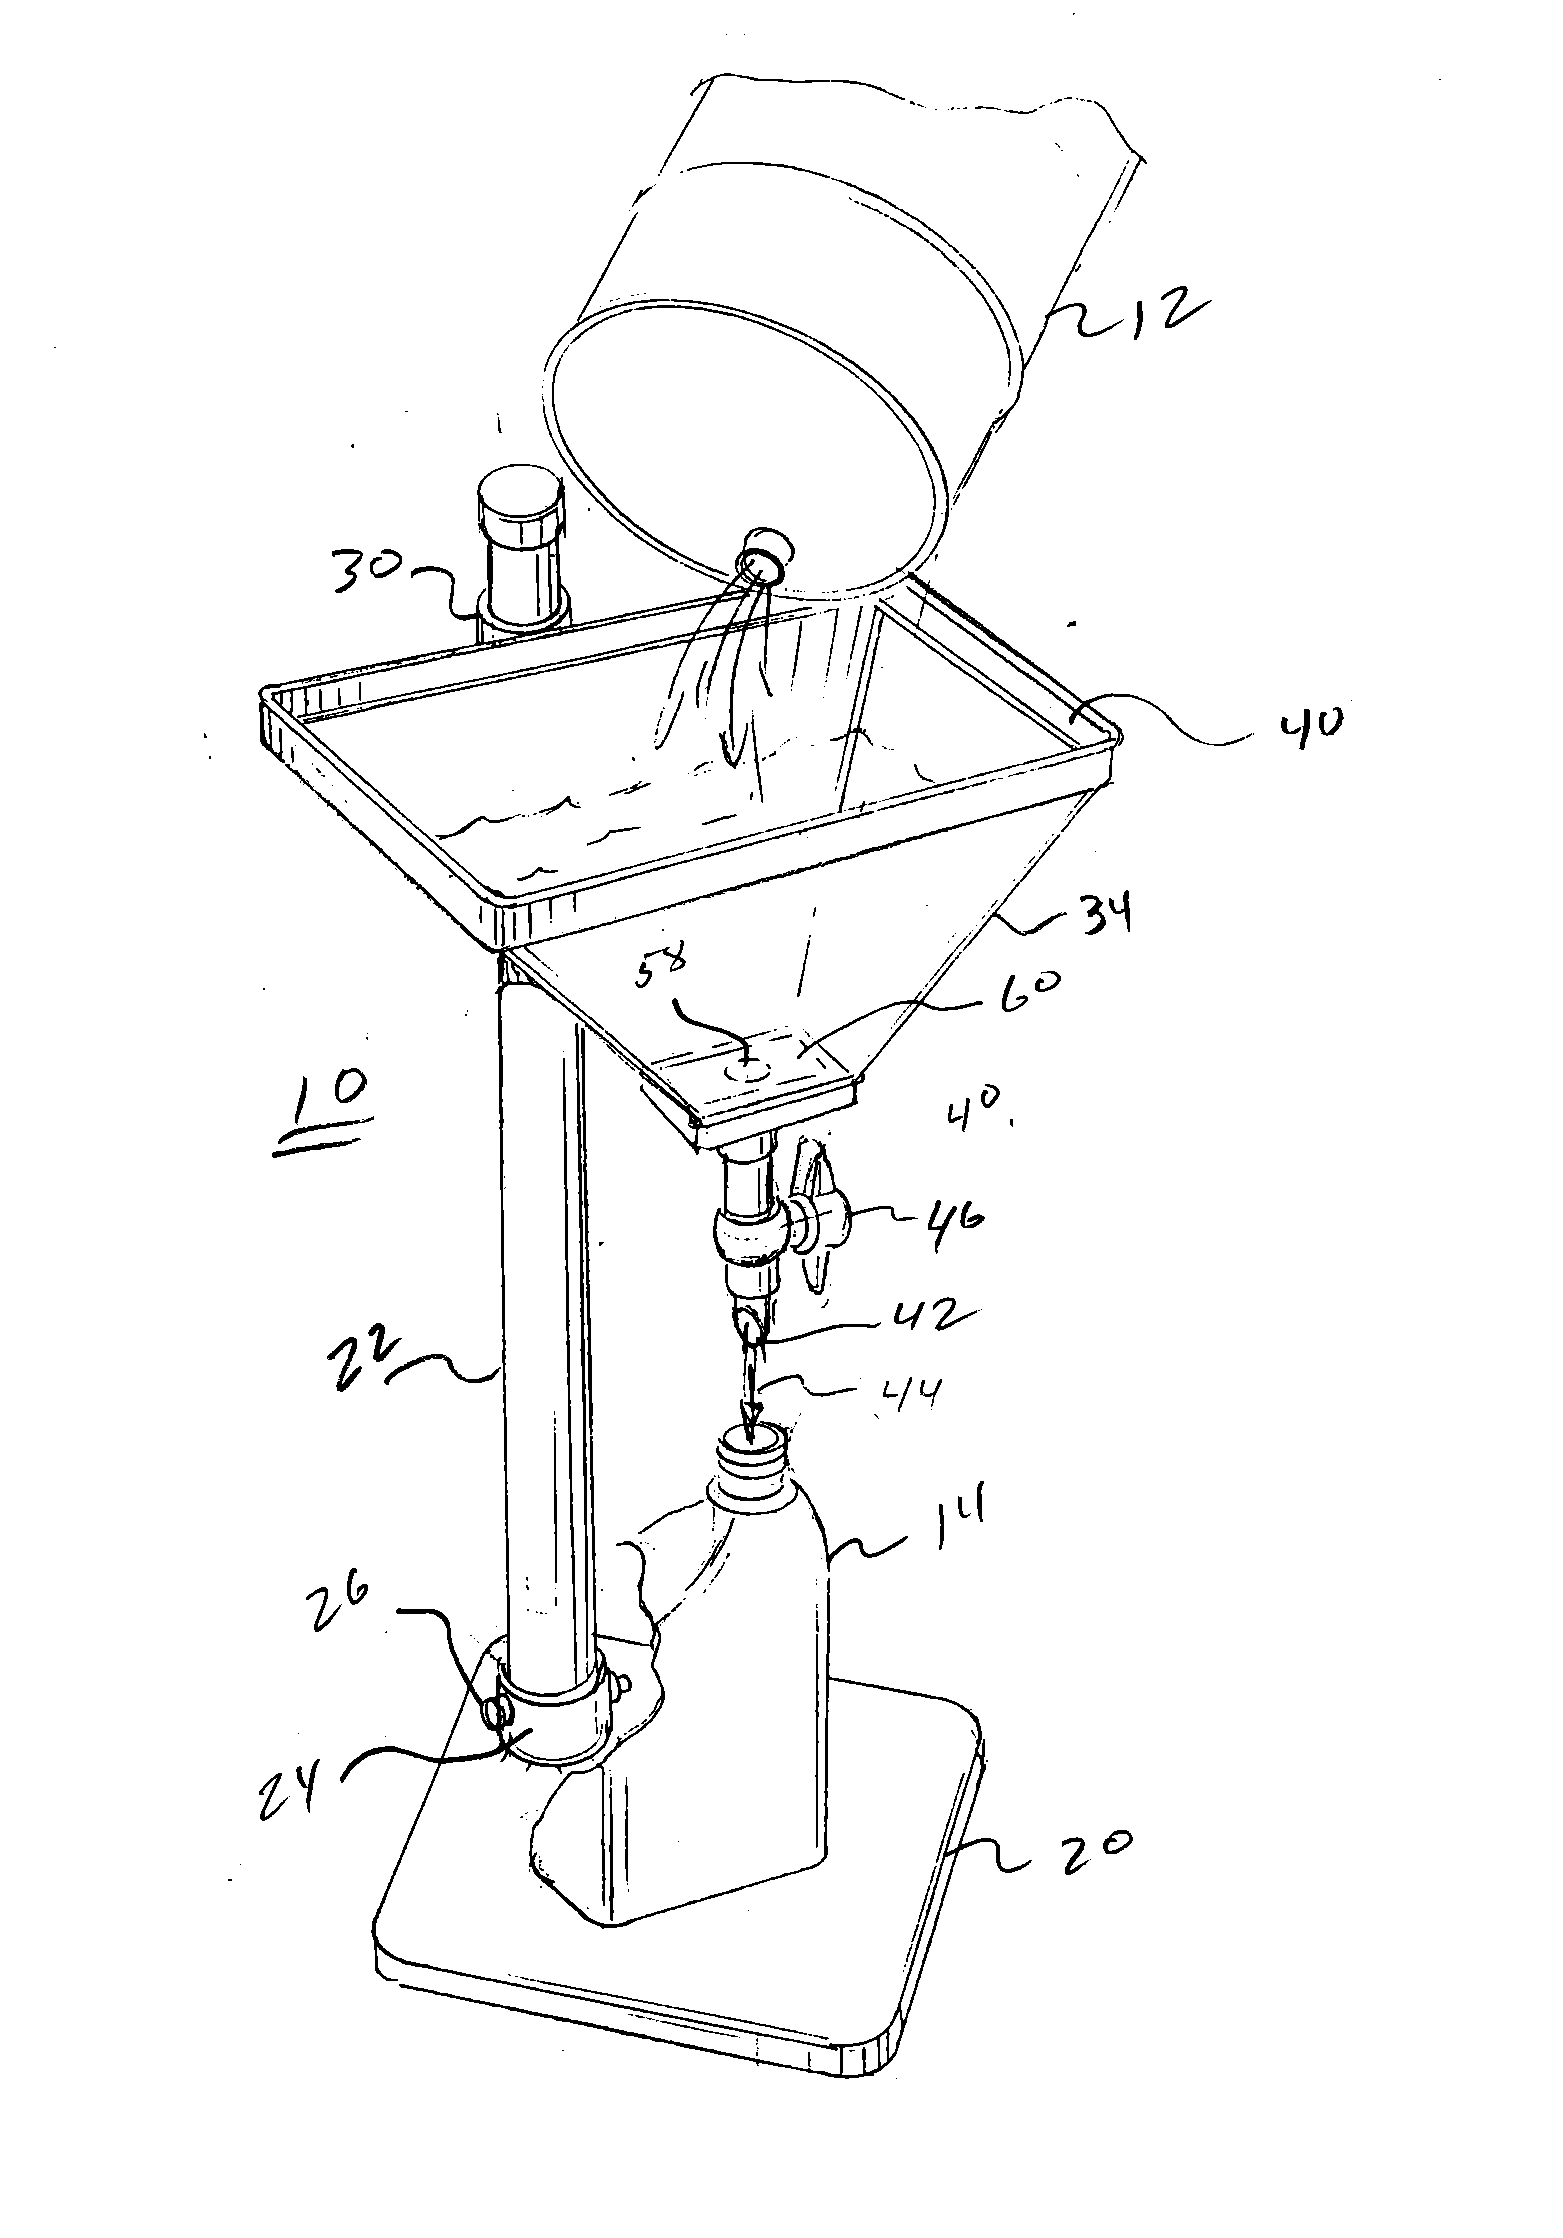 Dismantleable apparatus for transferring fluids between containers